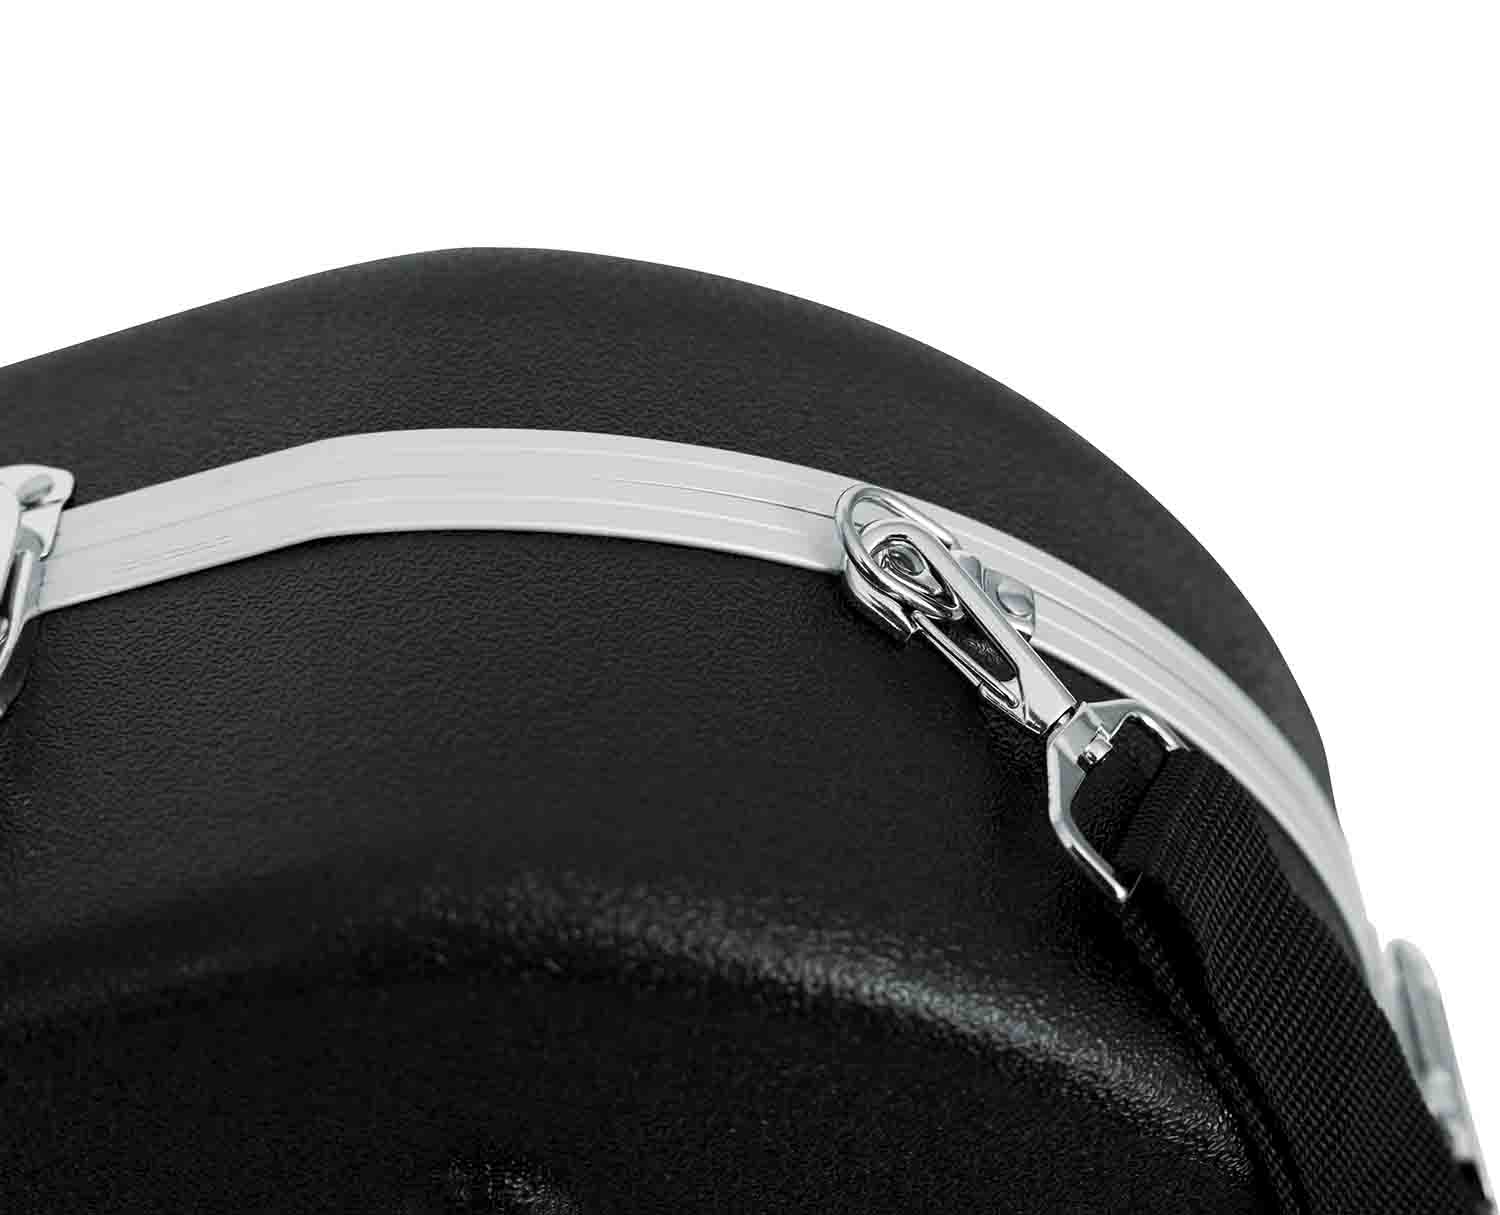 Gator Cases GC-MANDOLIN Deluxe Molded Guitar Case for Both A and F Style Mandolins Guitar - Hollywood DJ